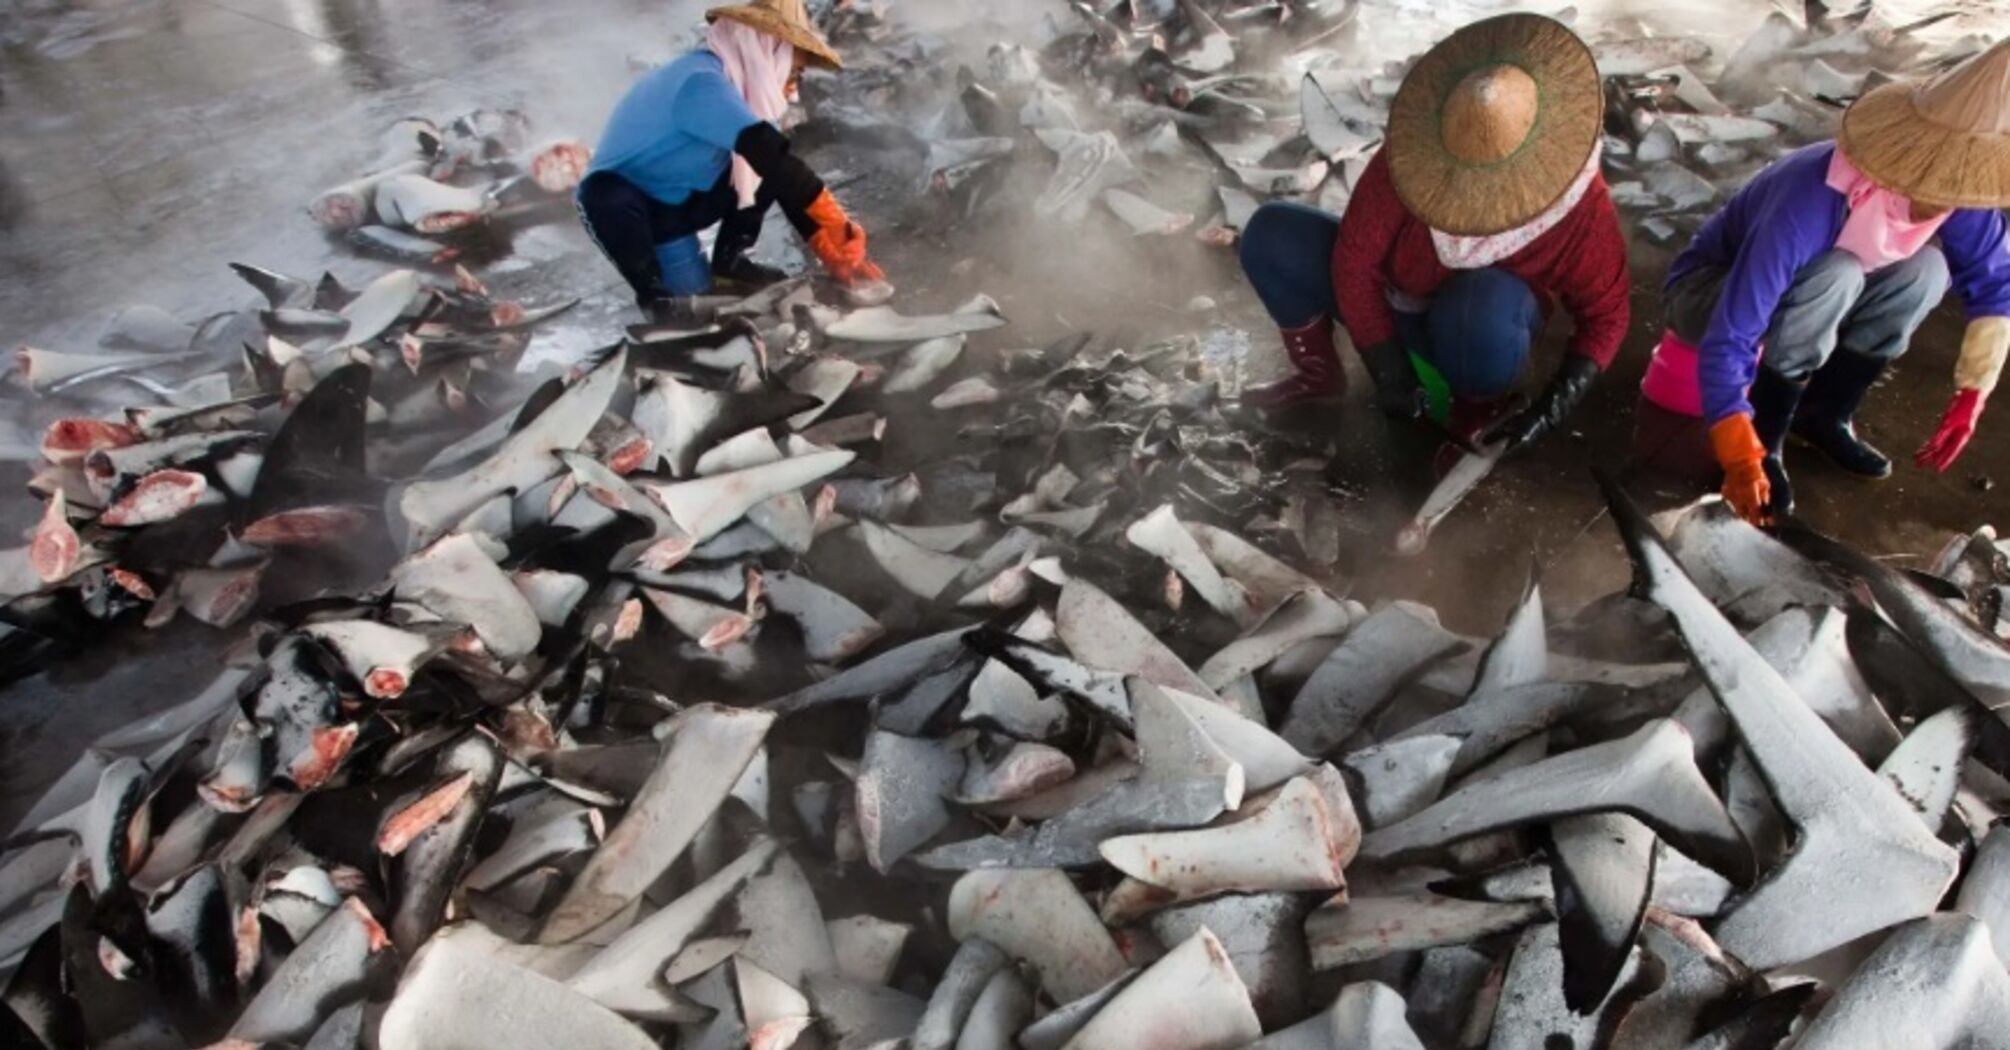 About 10 thousand blue sharks were killed in Brazil by finning hunters